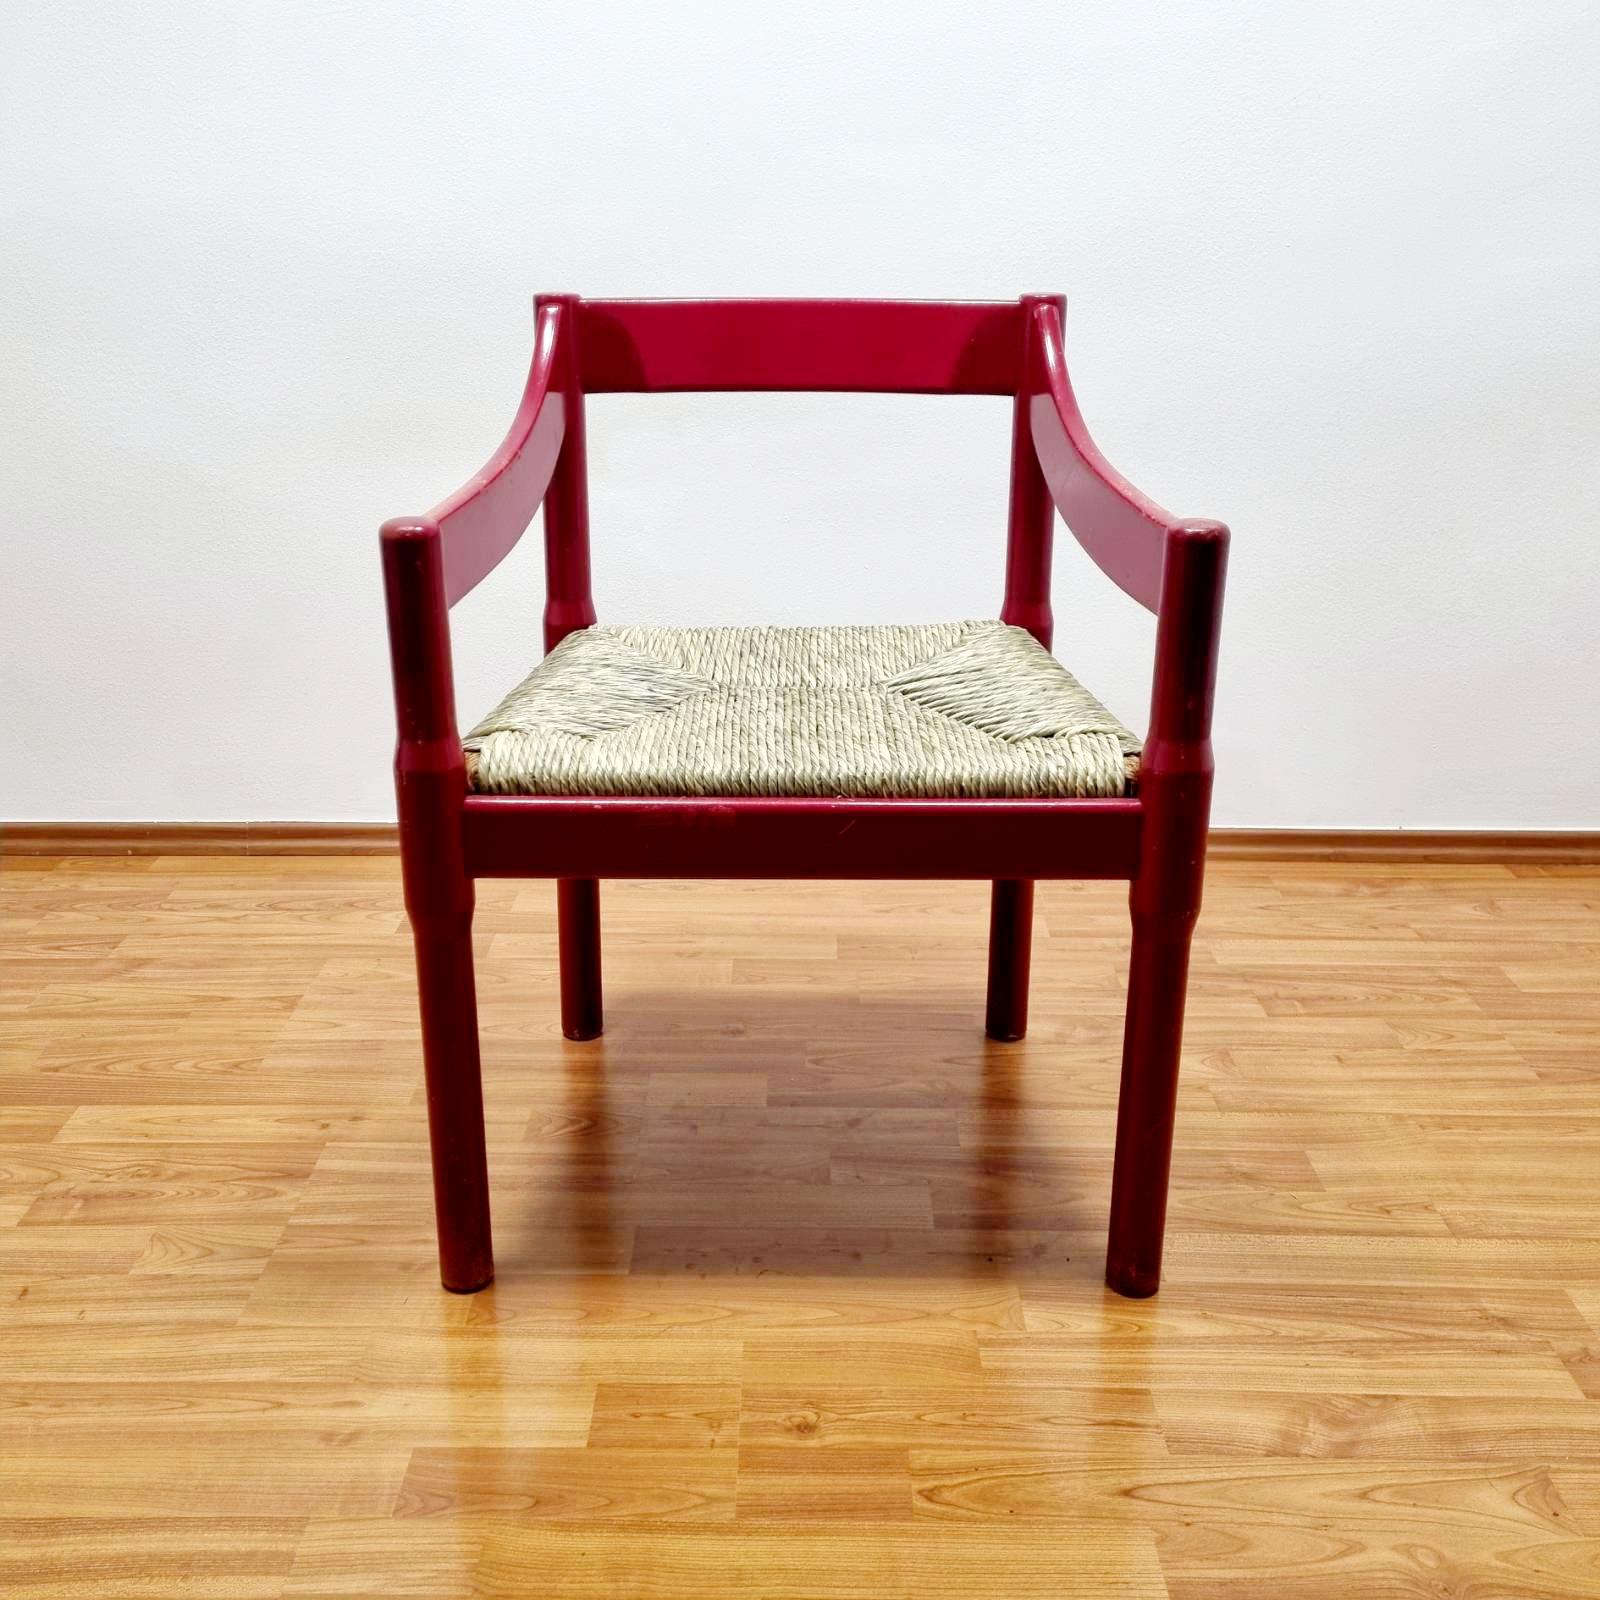 Mid Century armchair Carimate designed by Vico Magistretti and produce by Cassina in the late 60s
Made of solid wood and rope in good vintage condition with traces of use and age on the color. All visible on photos.
Dimensions:
H 75 cm
W 57 cm
D 46